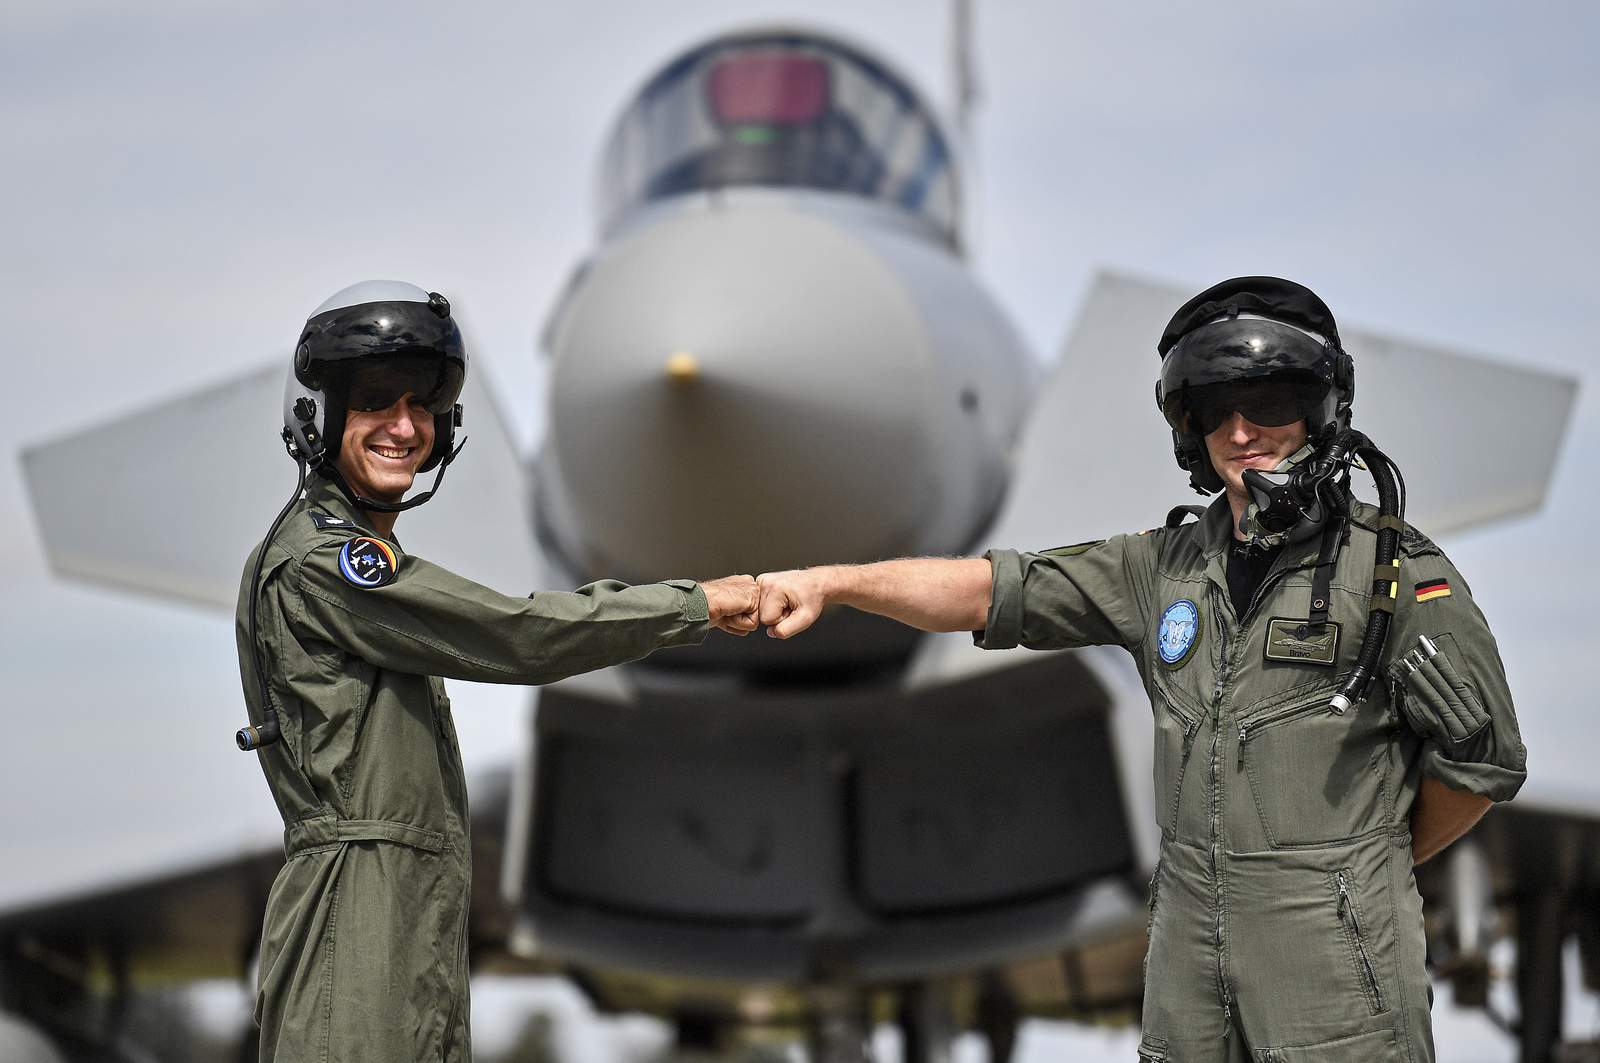 Germany welcomes Israeli air force for first joint exercise